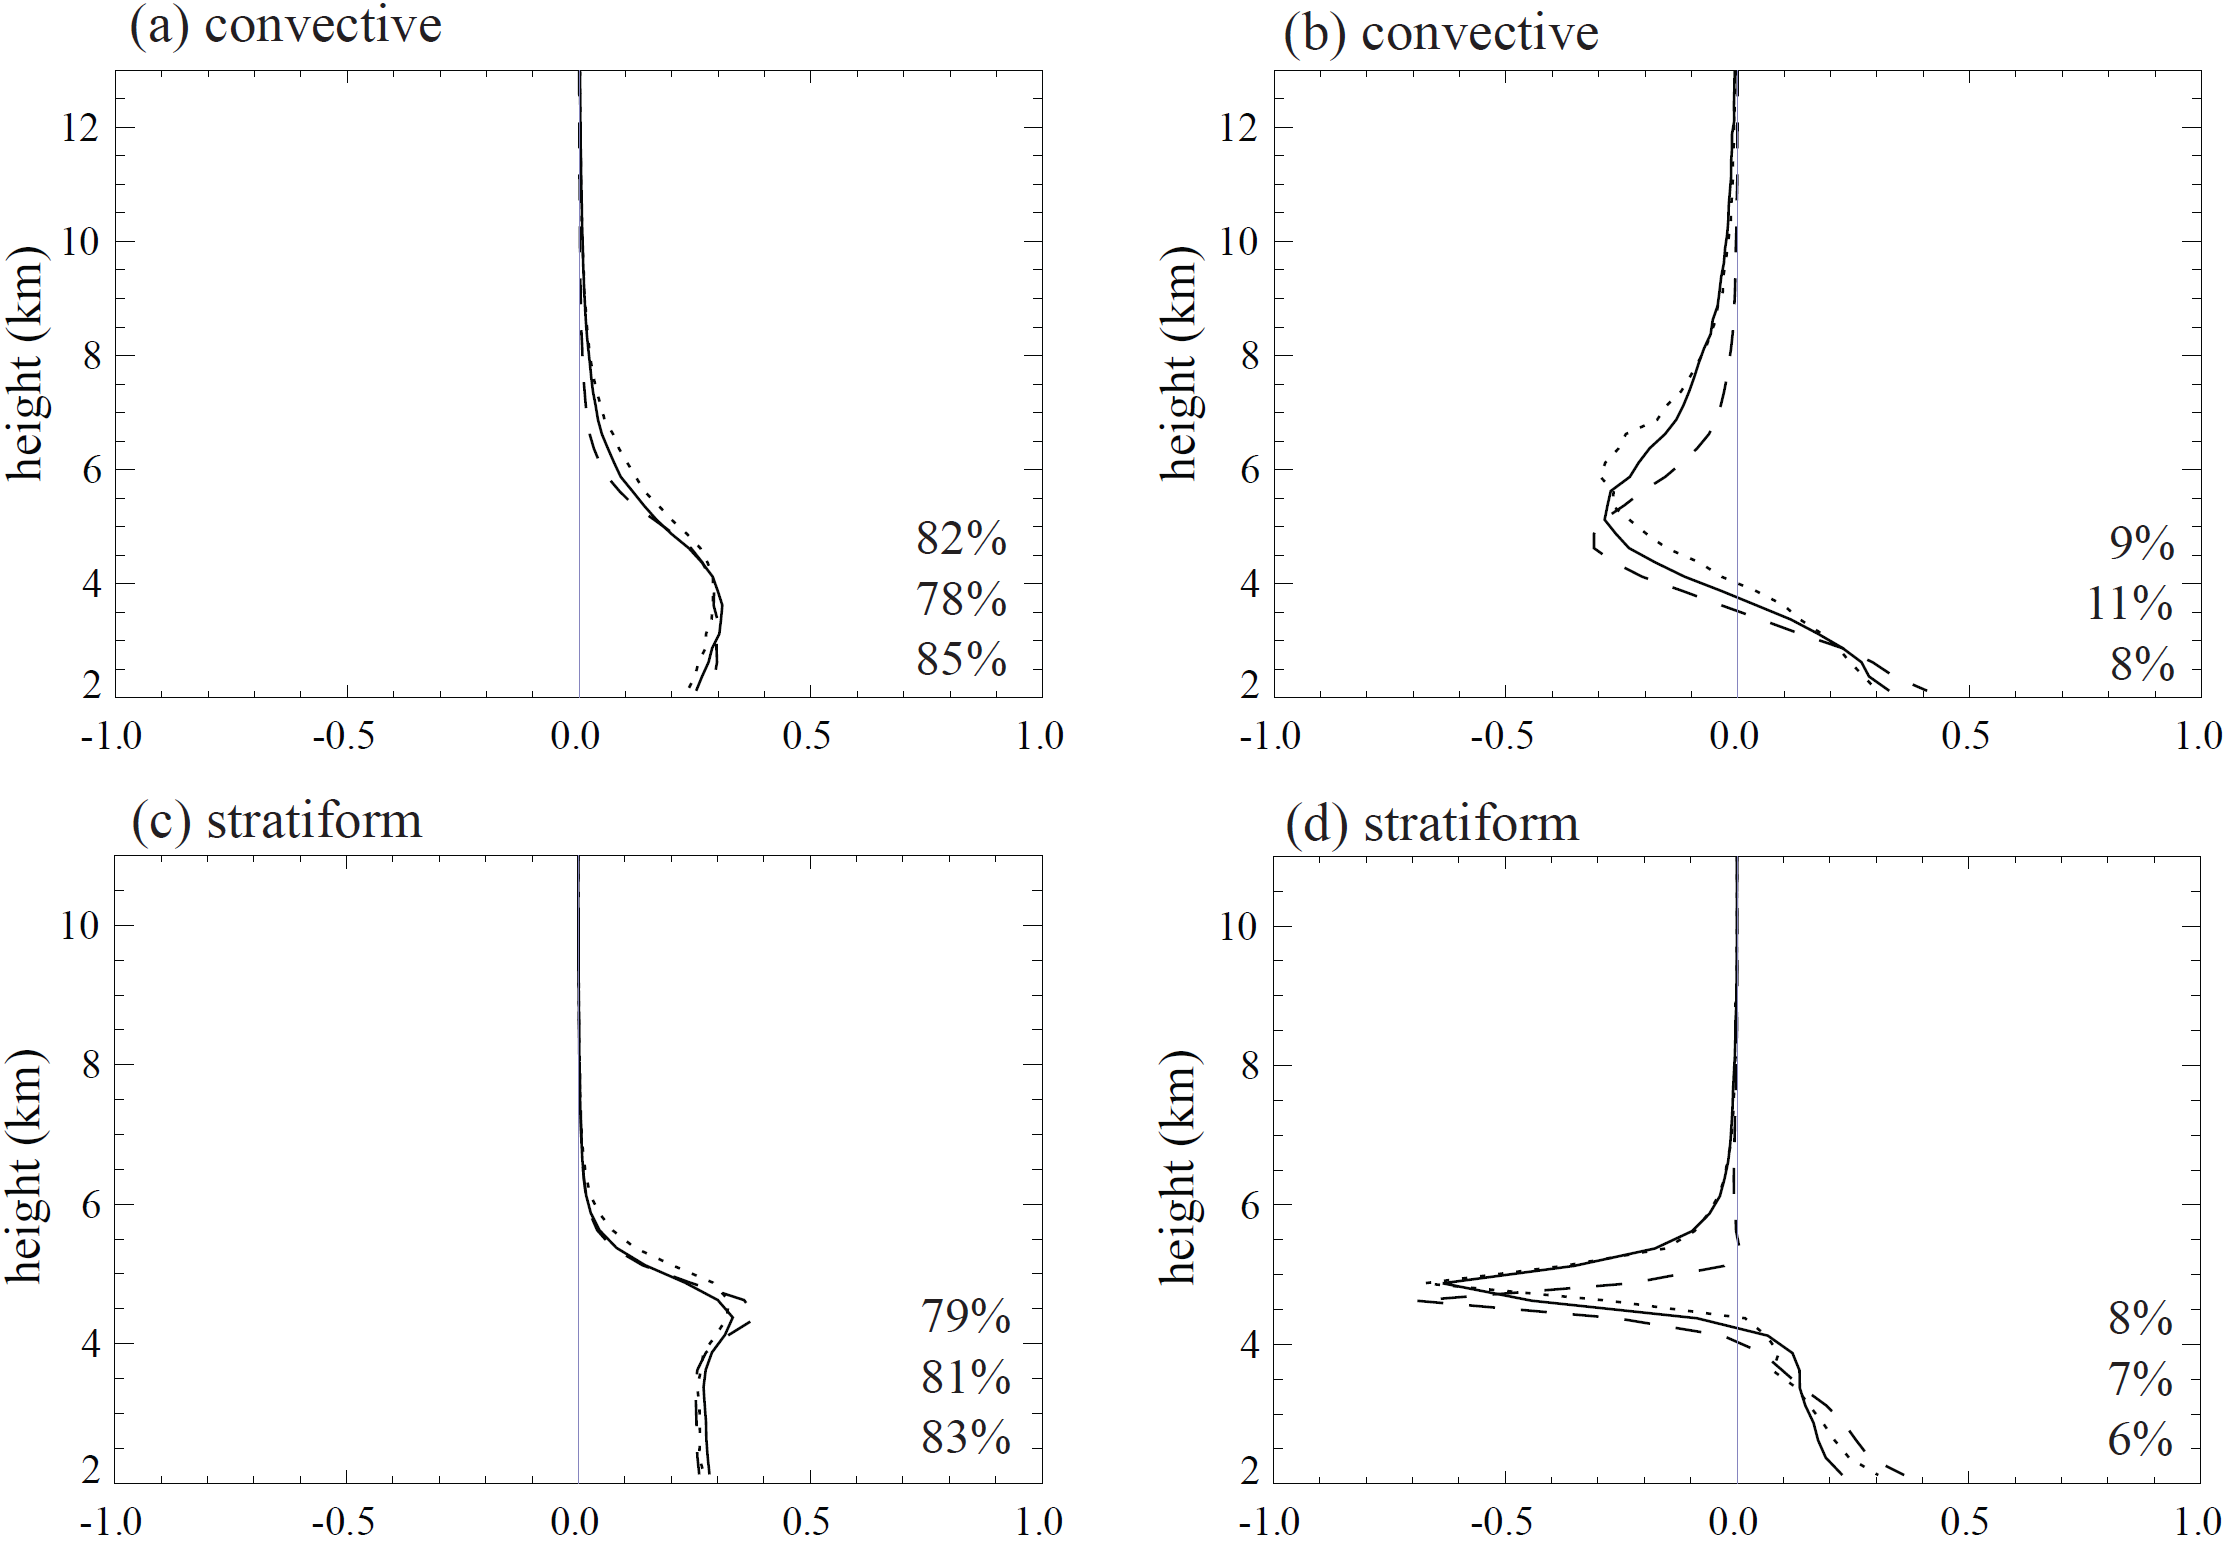 Figure 28. (a,c) First and (b,d) second EOFs of radar reflectivity profiles for convective and stratiform rain. Numbers inside panels denote eigenvalues in percent for EA1(solid line), EA2(dotted line) and EA3(dashed line).